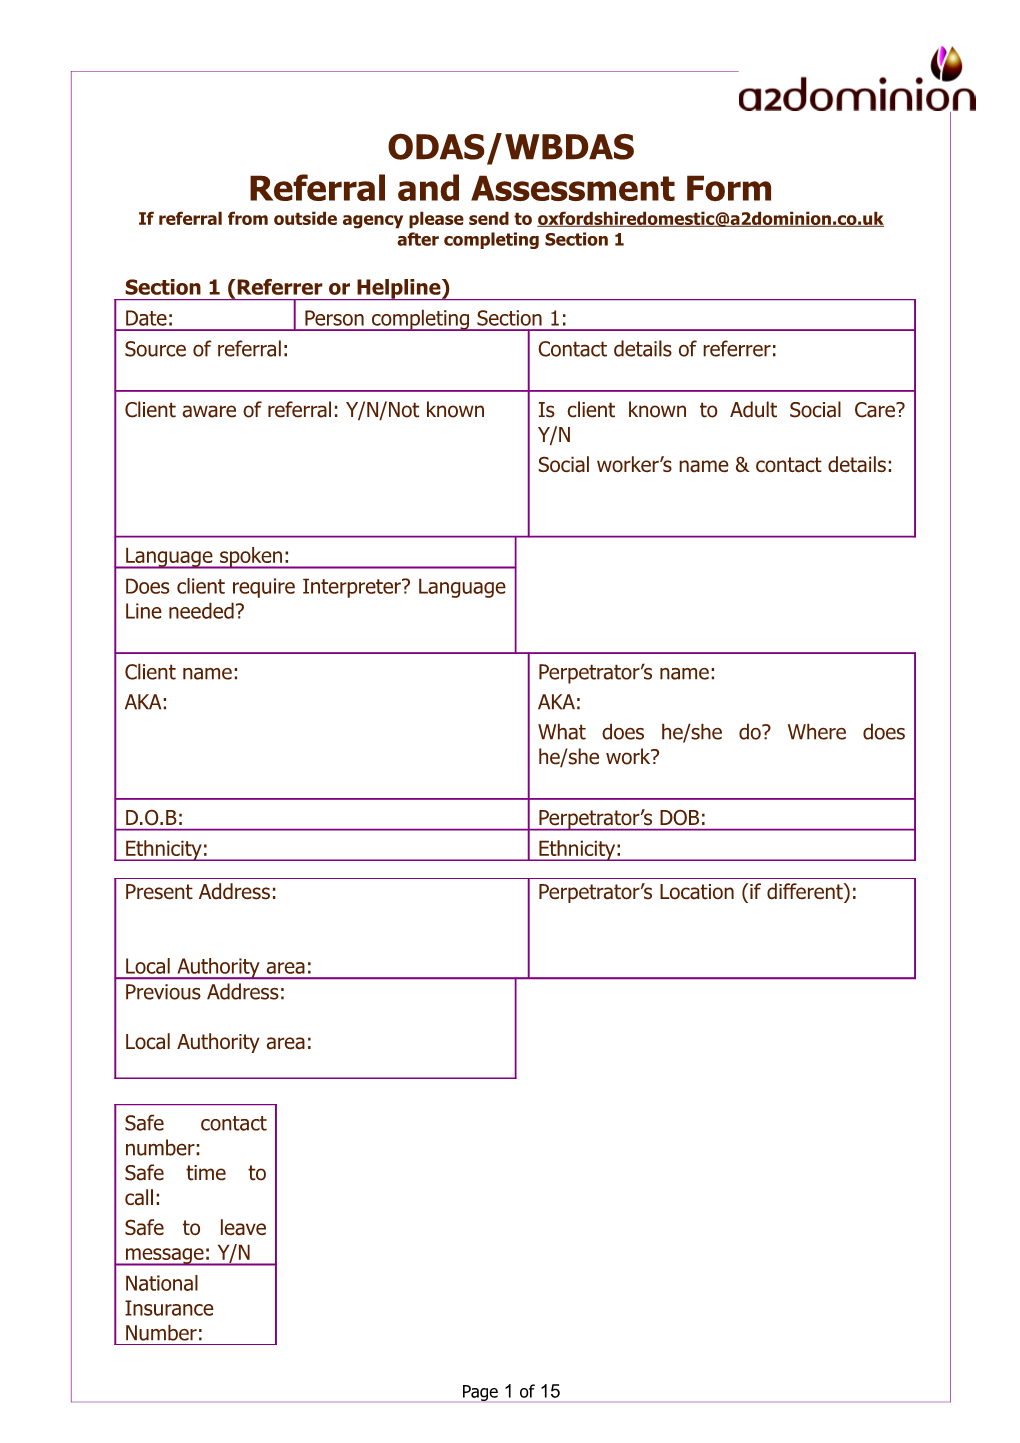 DAS Referral and Assessment Form